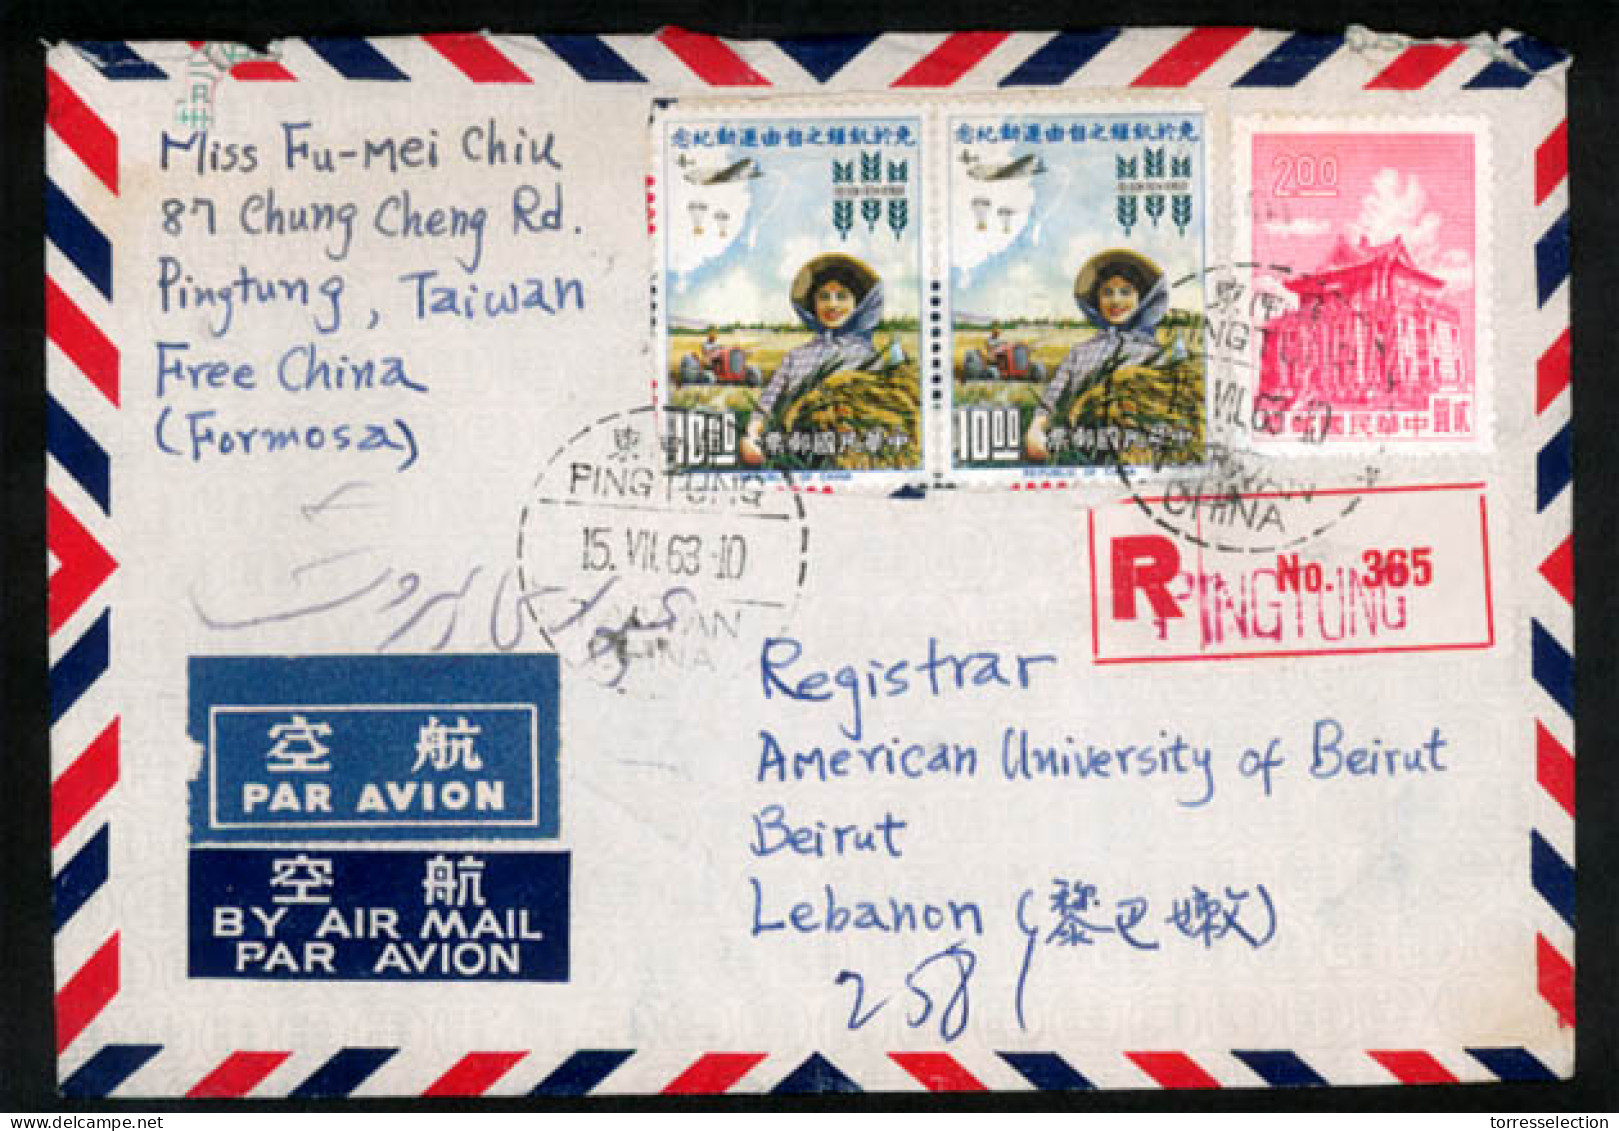 TAIWAN. 1963 (15 July). TAIWAN-LEBANON. Pingtung To Beyrouth/Lebanon (20 July). Registered Franked Airmail Envelope. Mos - Other & Unclassified